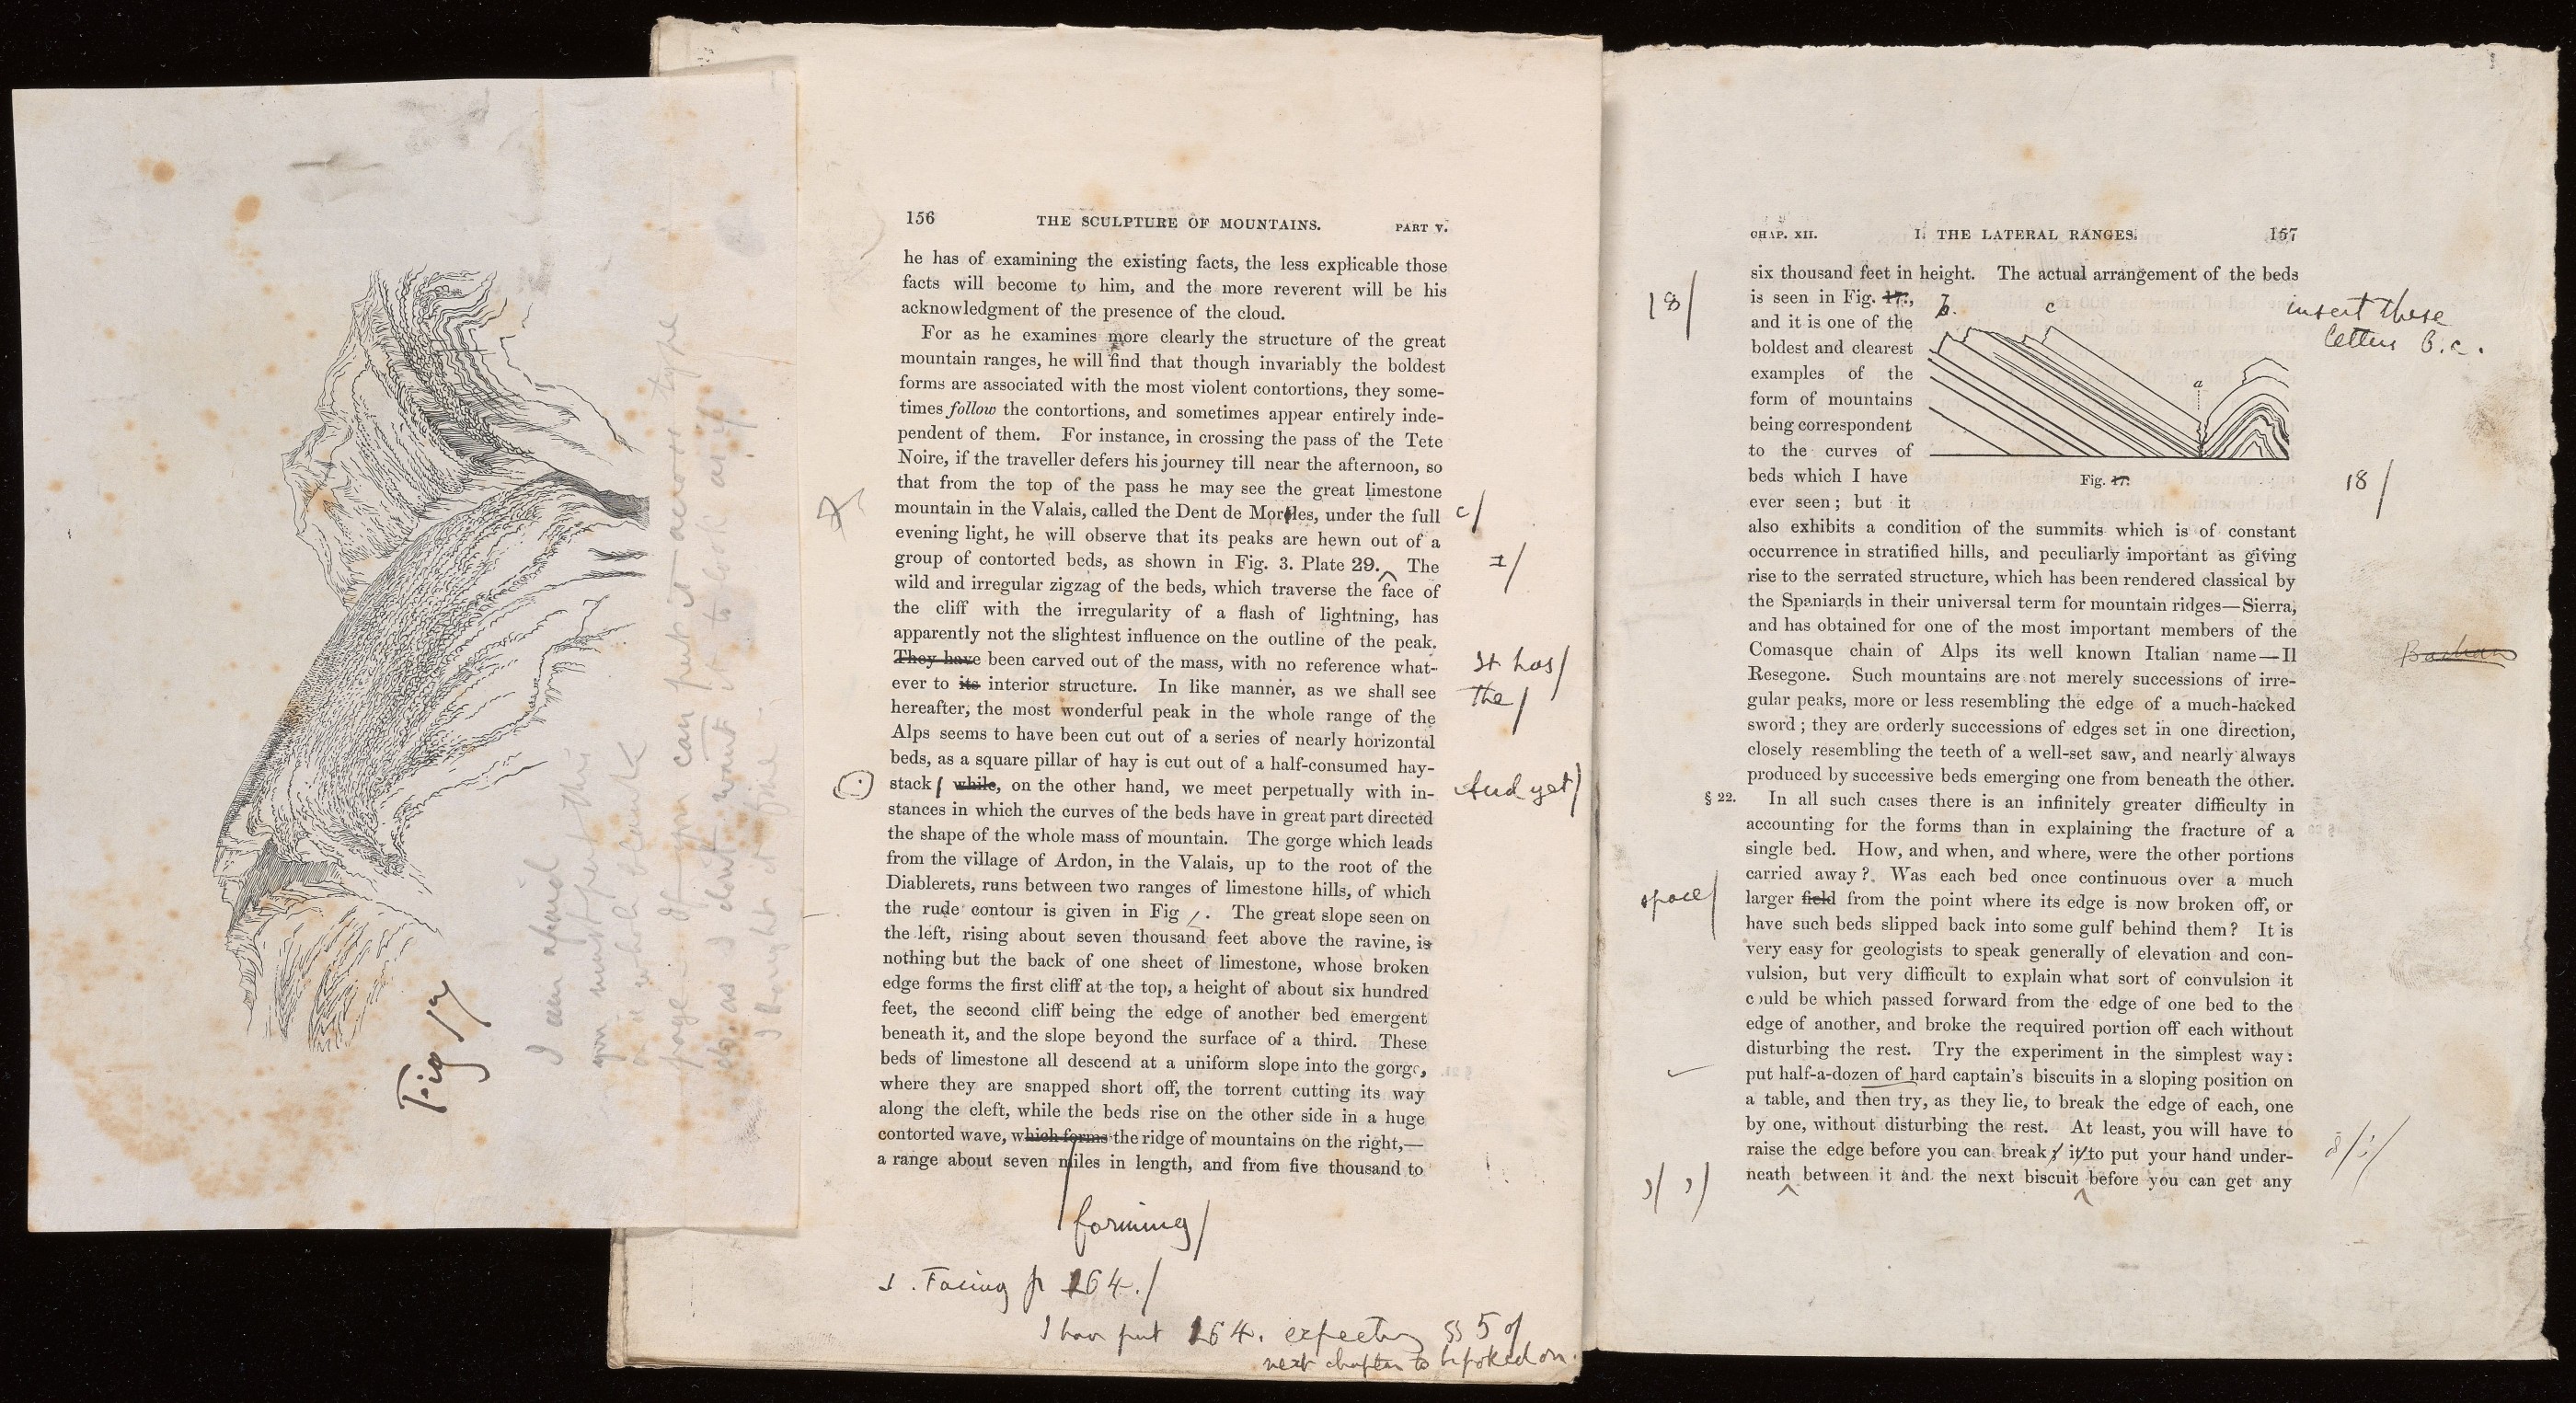 <p>Modern Painters: Page proofs of Volume IV, Part V, “Of Mountain Beauty,” with manuscript corrections. In an orange half-morocco box case, not dated. John Ruskin Collection. General Collection, Beinecke Rare Book and Manuscript Library, Yale University.</p>